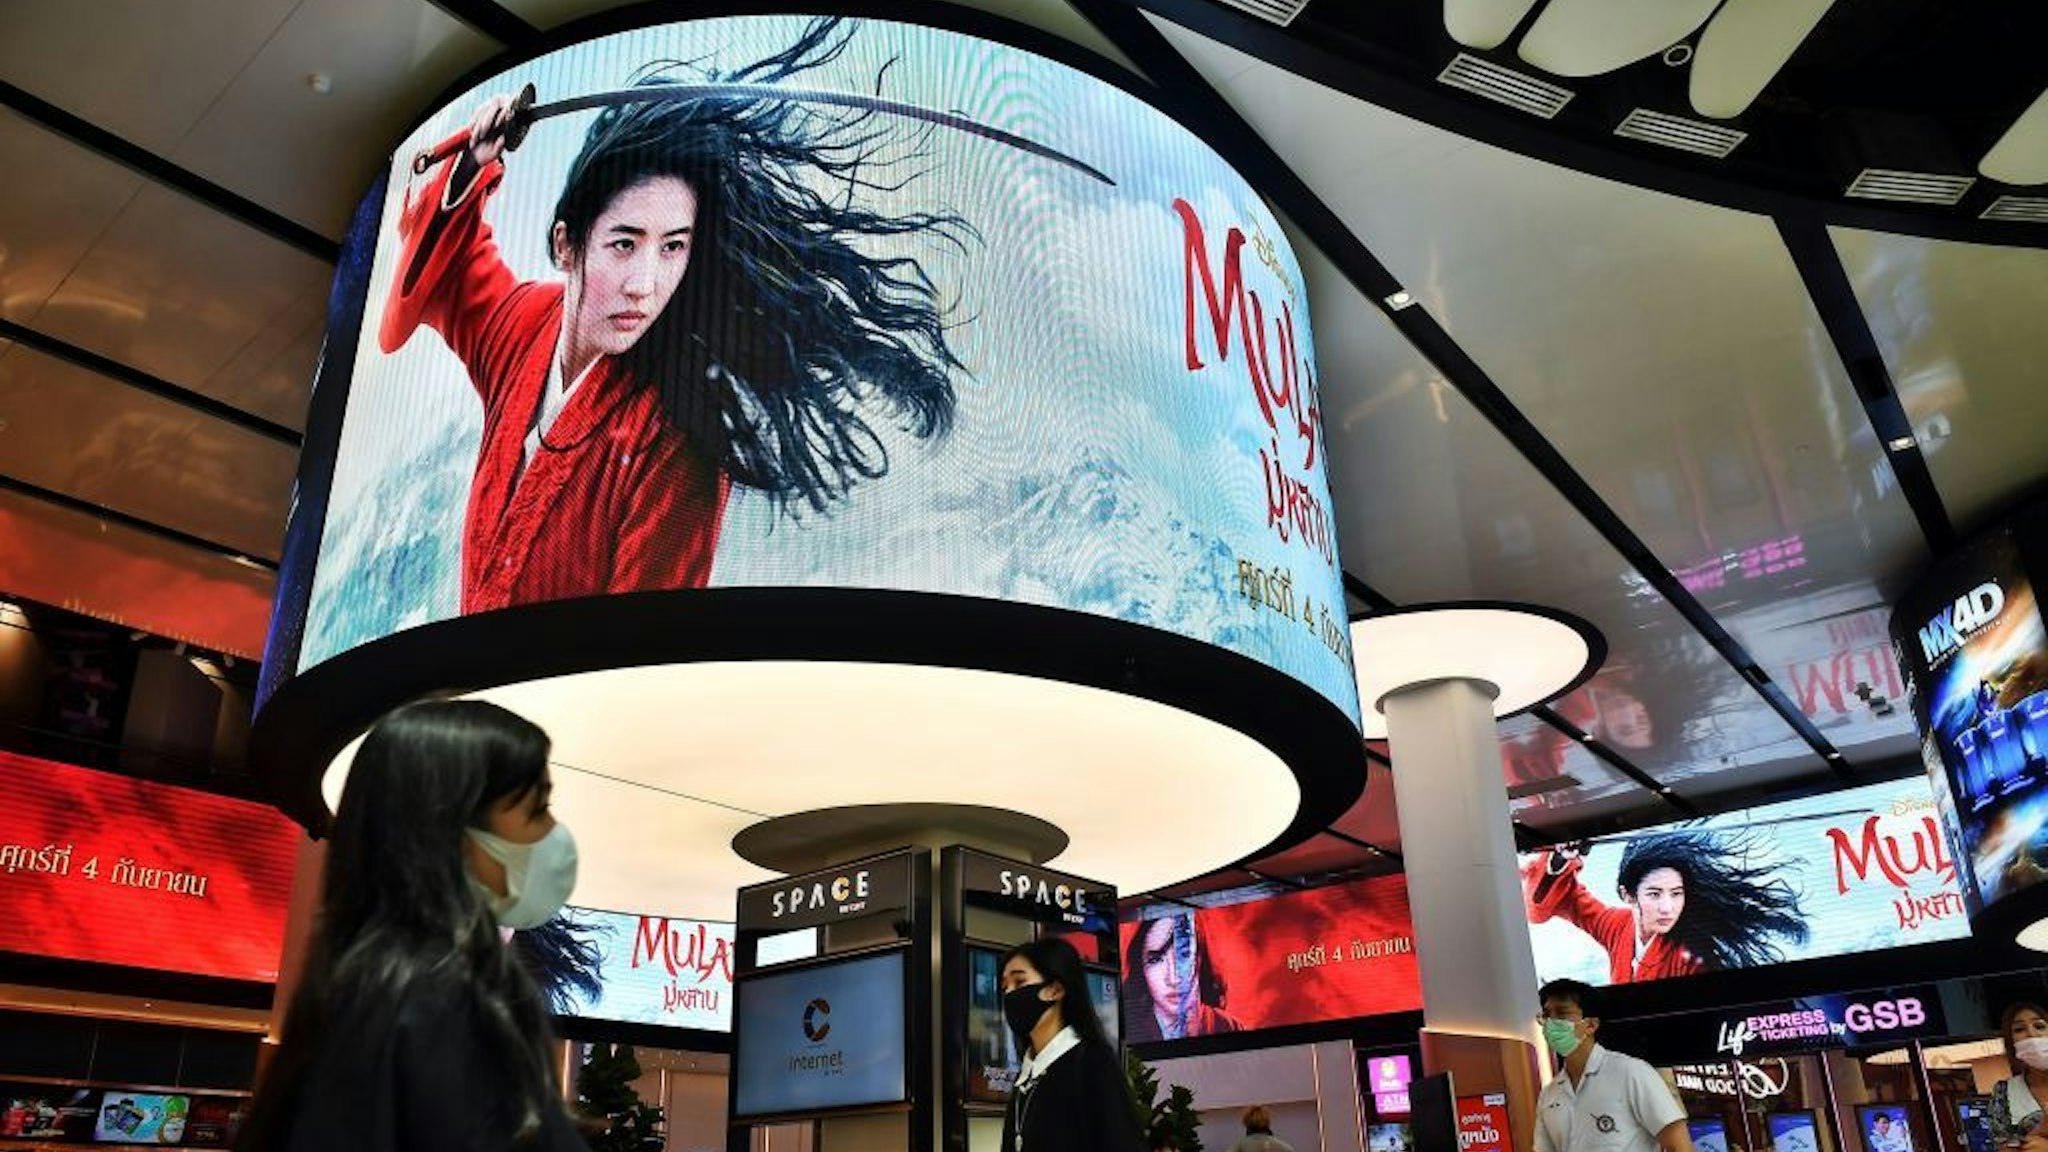 People walk past advertising displays for Disneys Mulan film at a cinema inside a shopping mall in Bangkok on September 8, 2020. - Disney's "Mulan" remake is facing fresh boycott calls after it emerged some of the blockbuster was filmed in China's Xinjiang, where widespread rights abuses against the region's Muslim population have been widely documented. (Photo by Lillian SUWANRUMPHA / AFP)